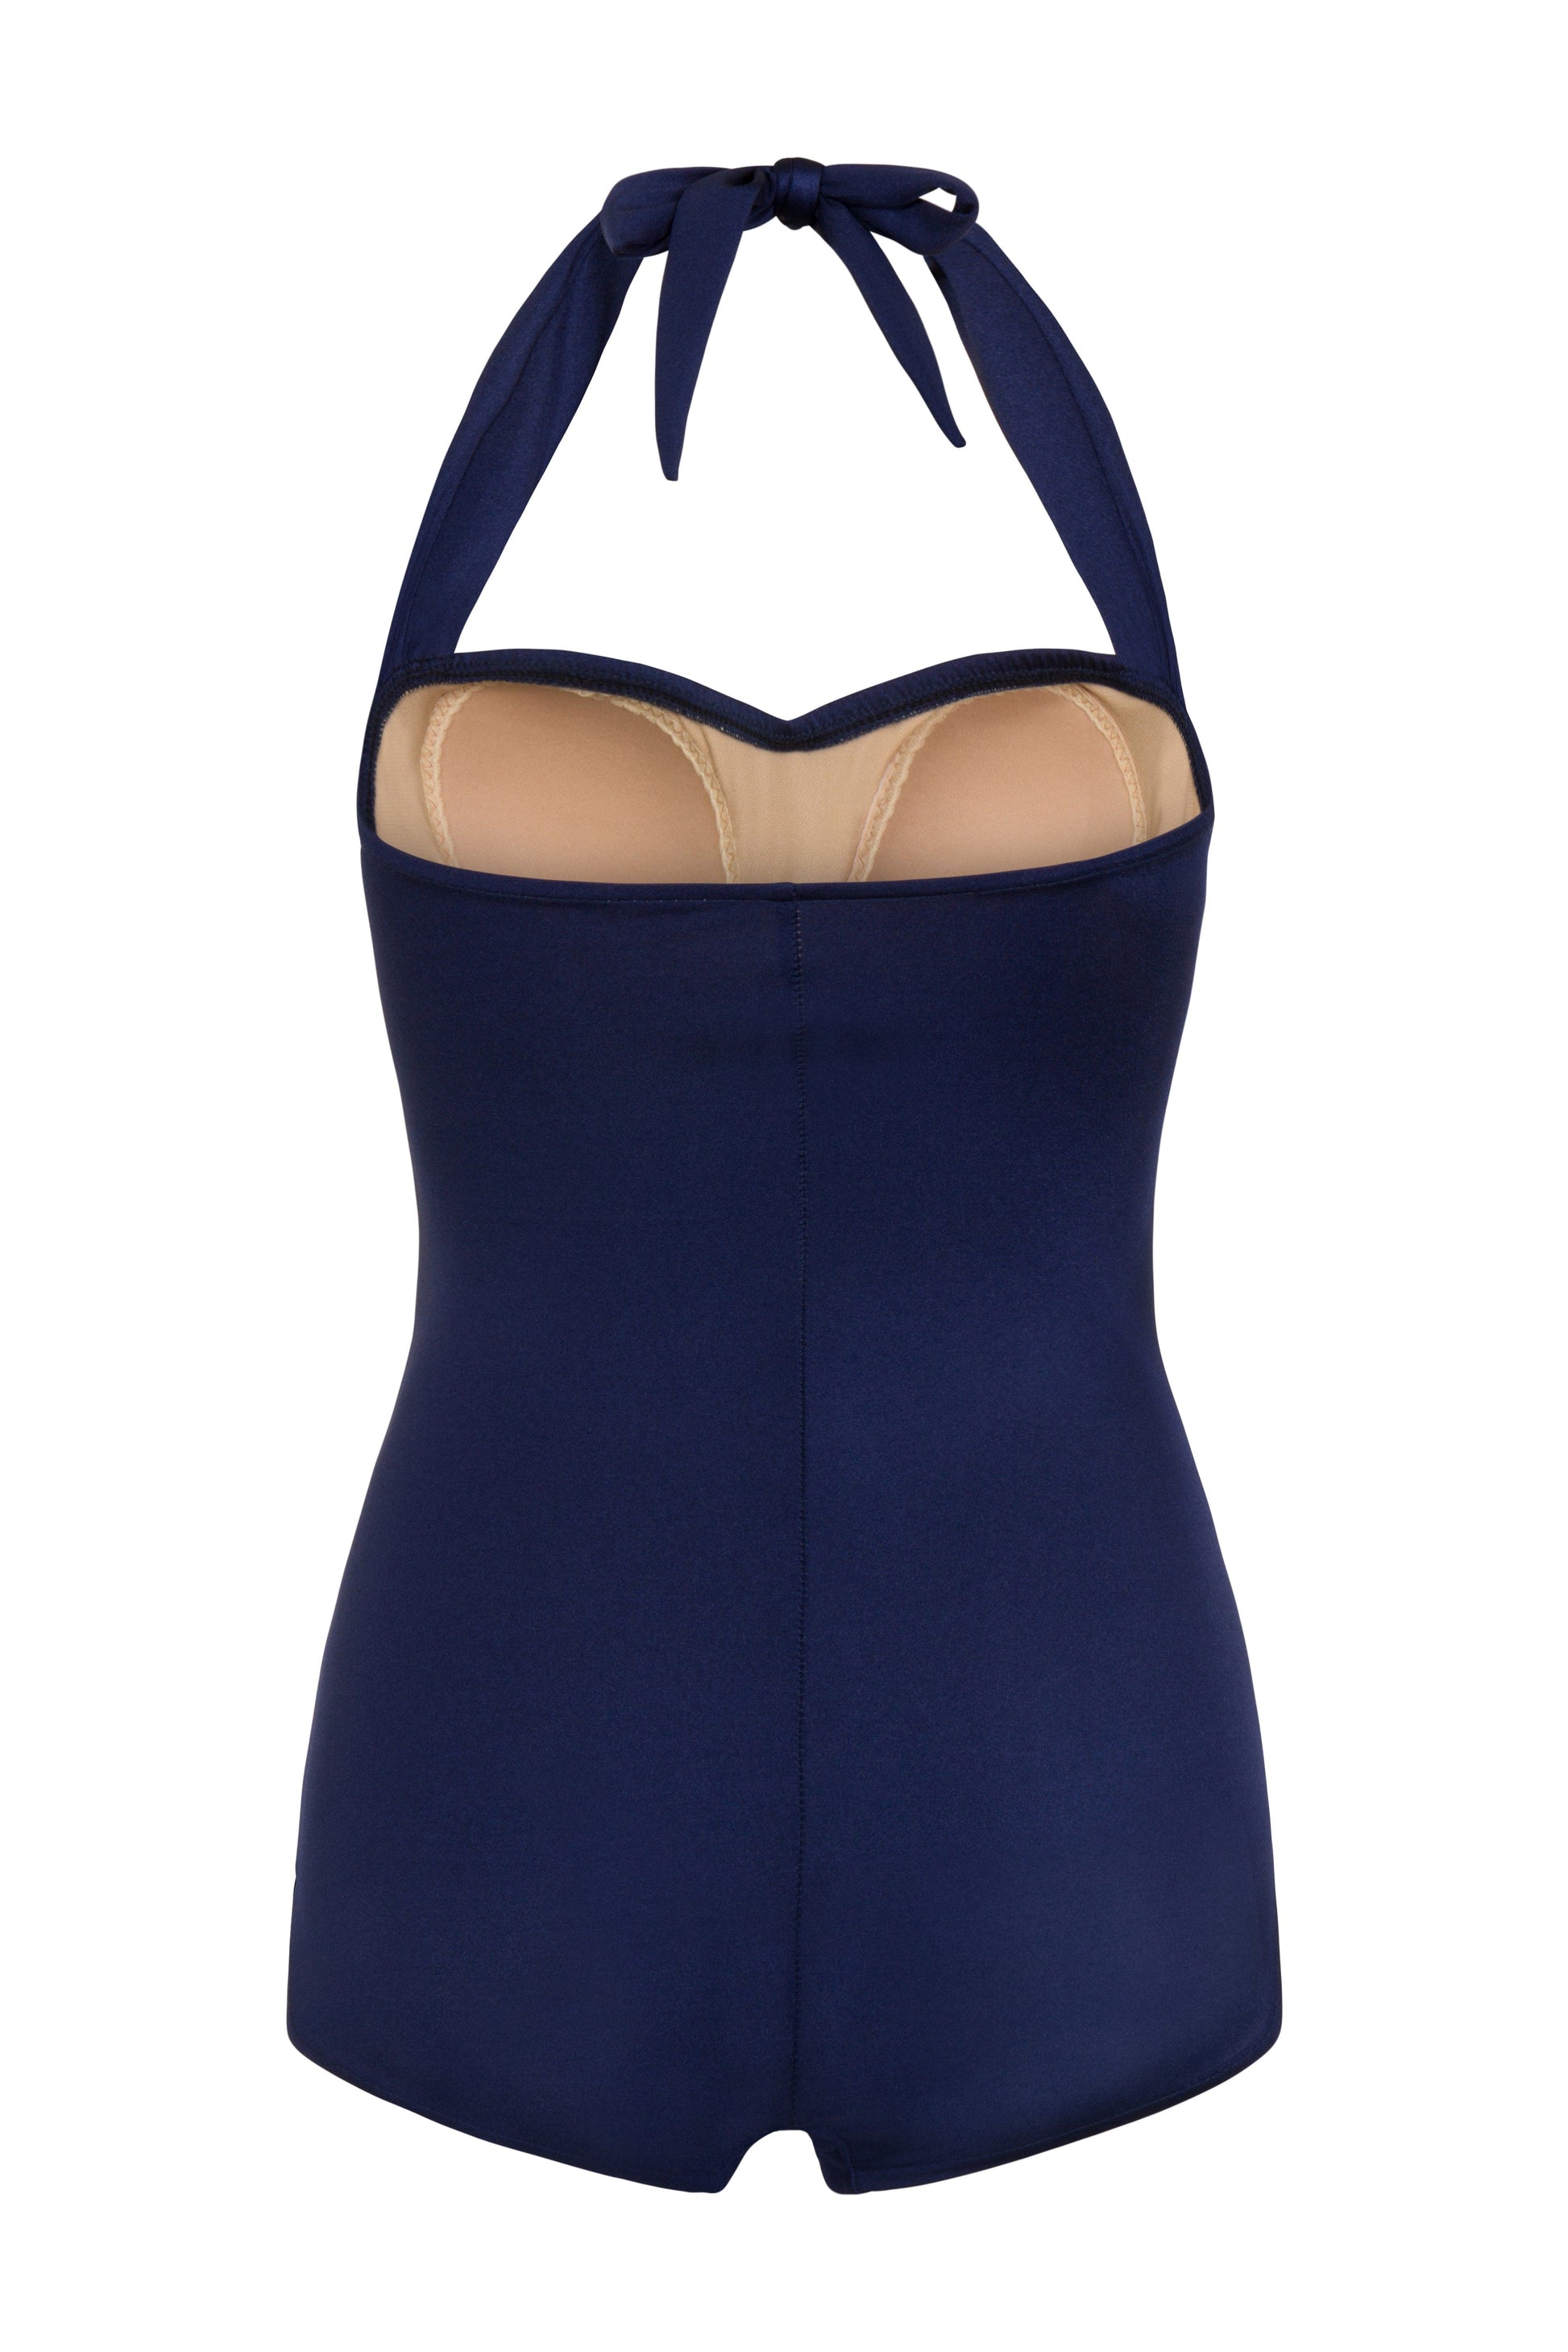 BettyliciousUK Swimsuit Esther Williams Navy Blue Vintage Style Swimsuit with Tummy Control